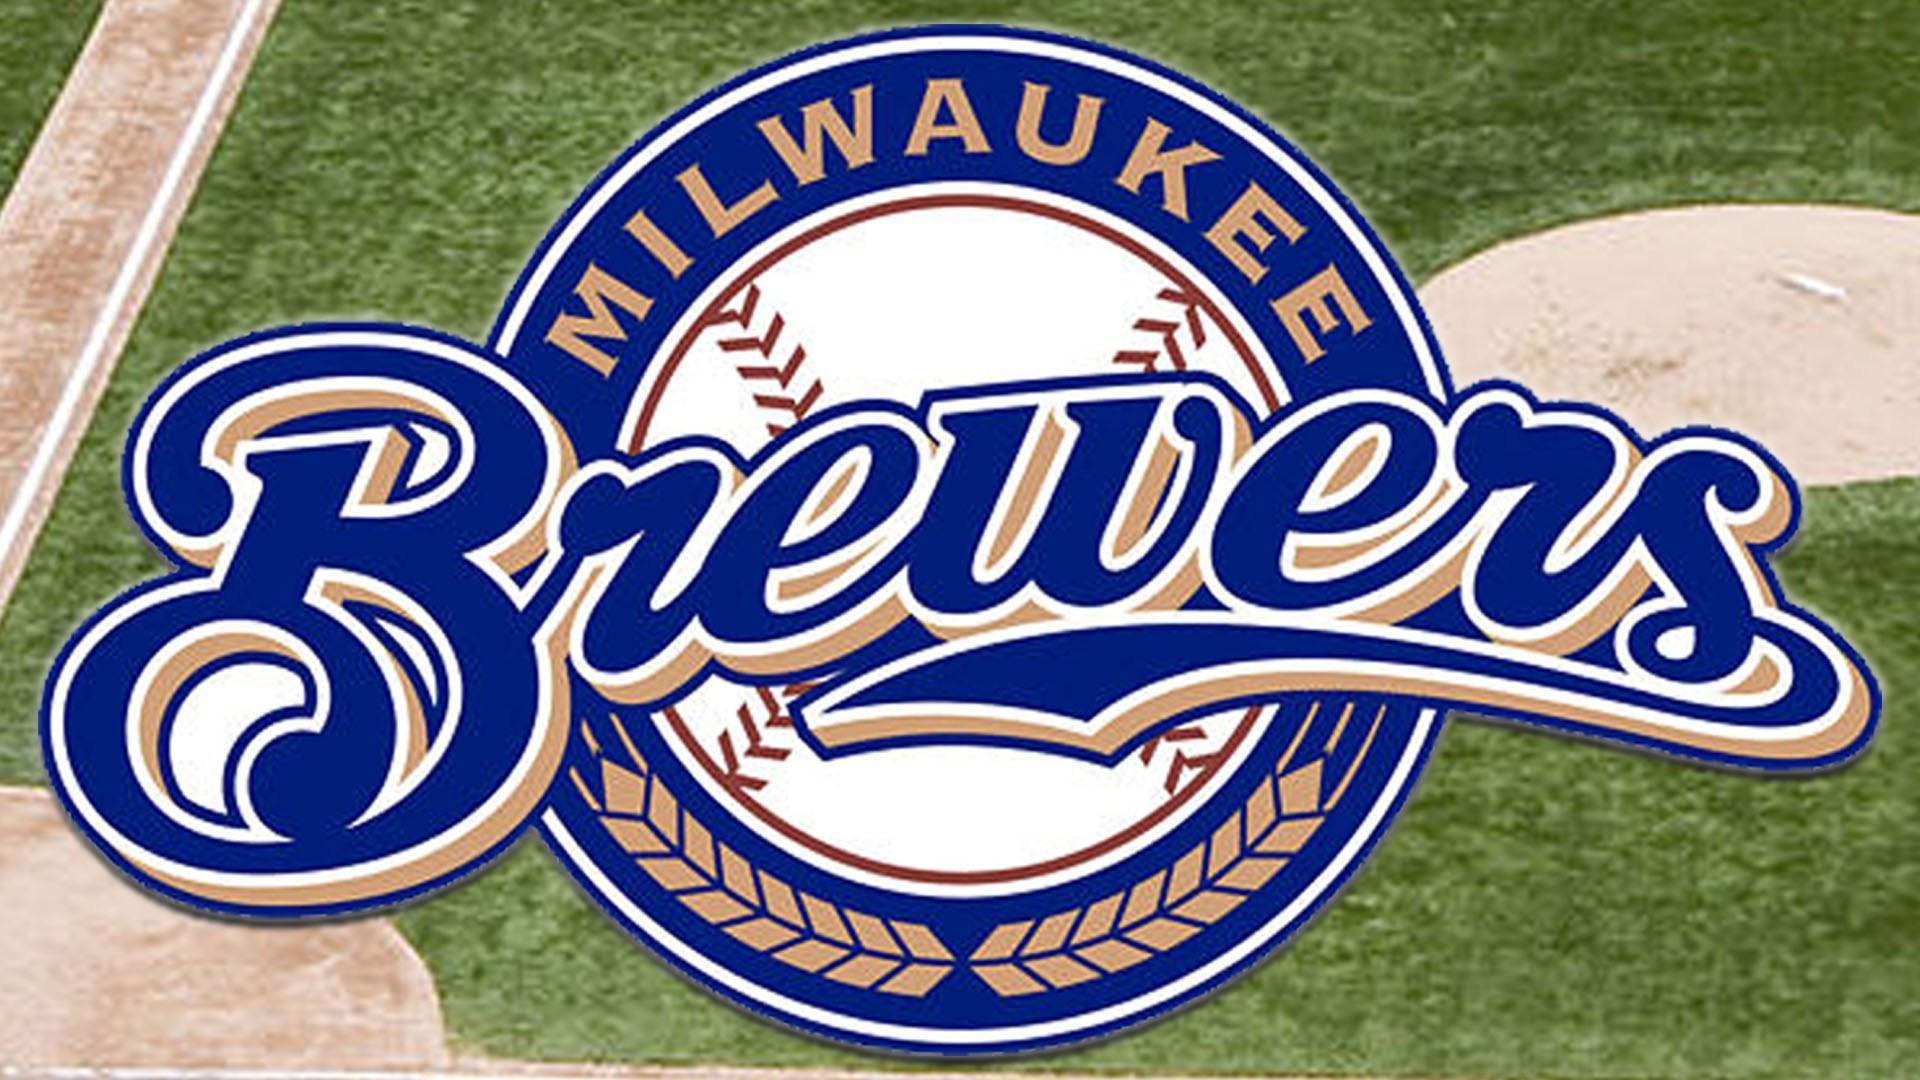 Brewers announce 2020 Spring Training schedule